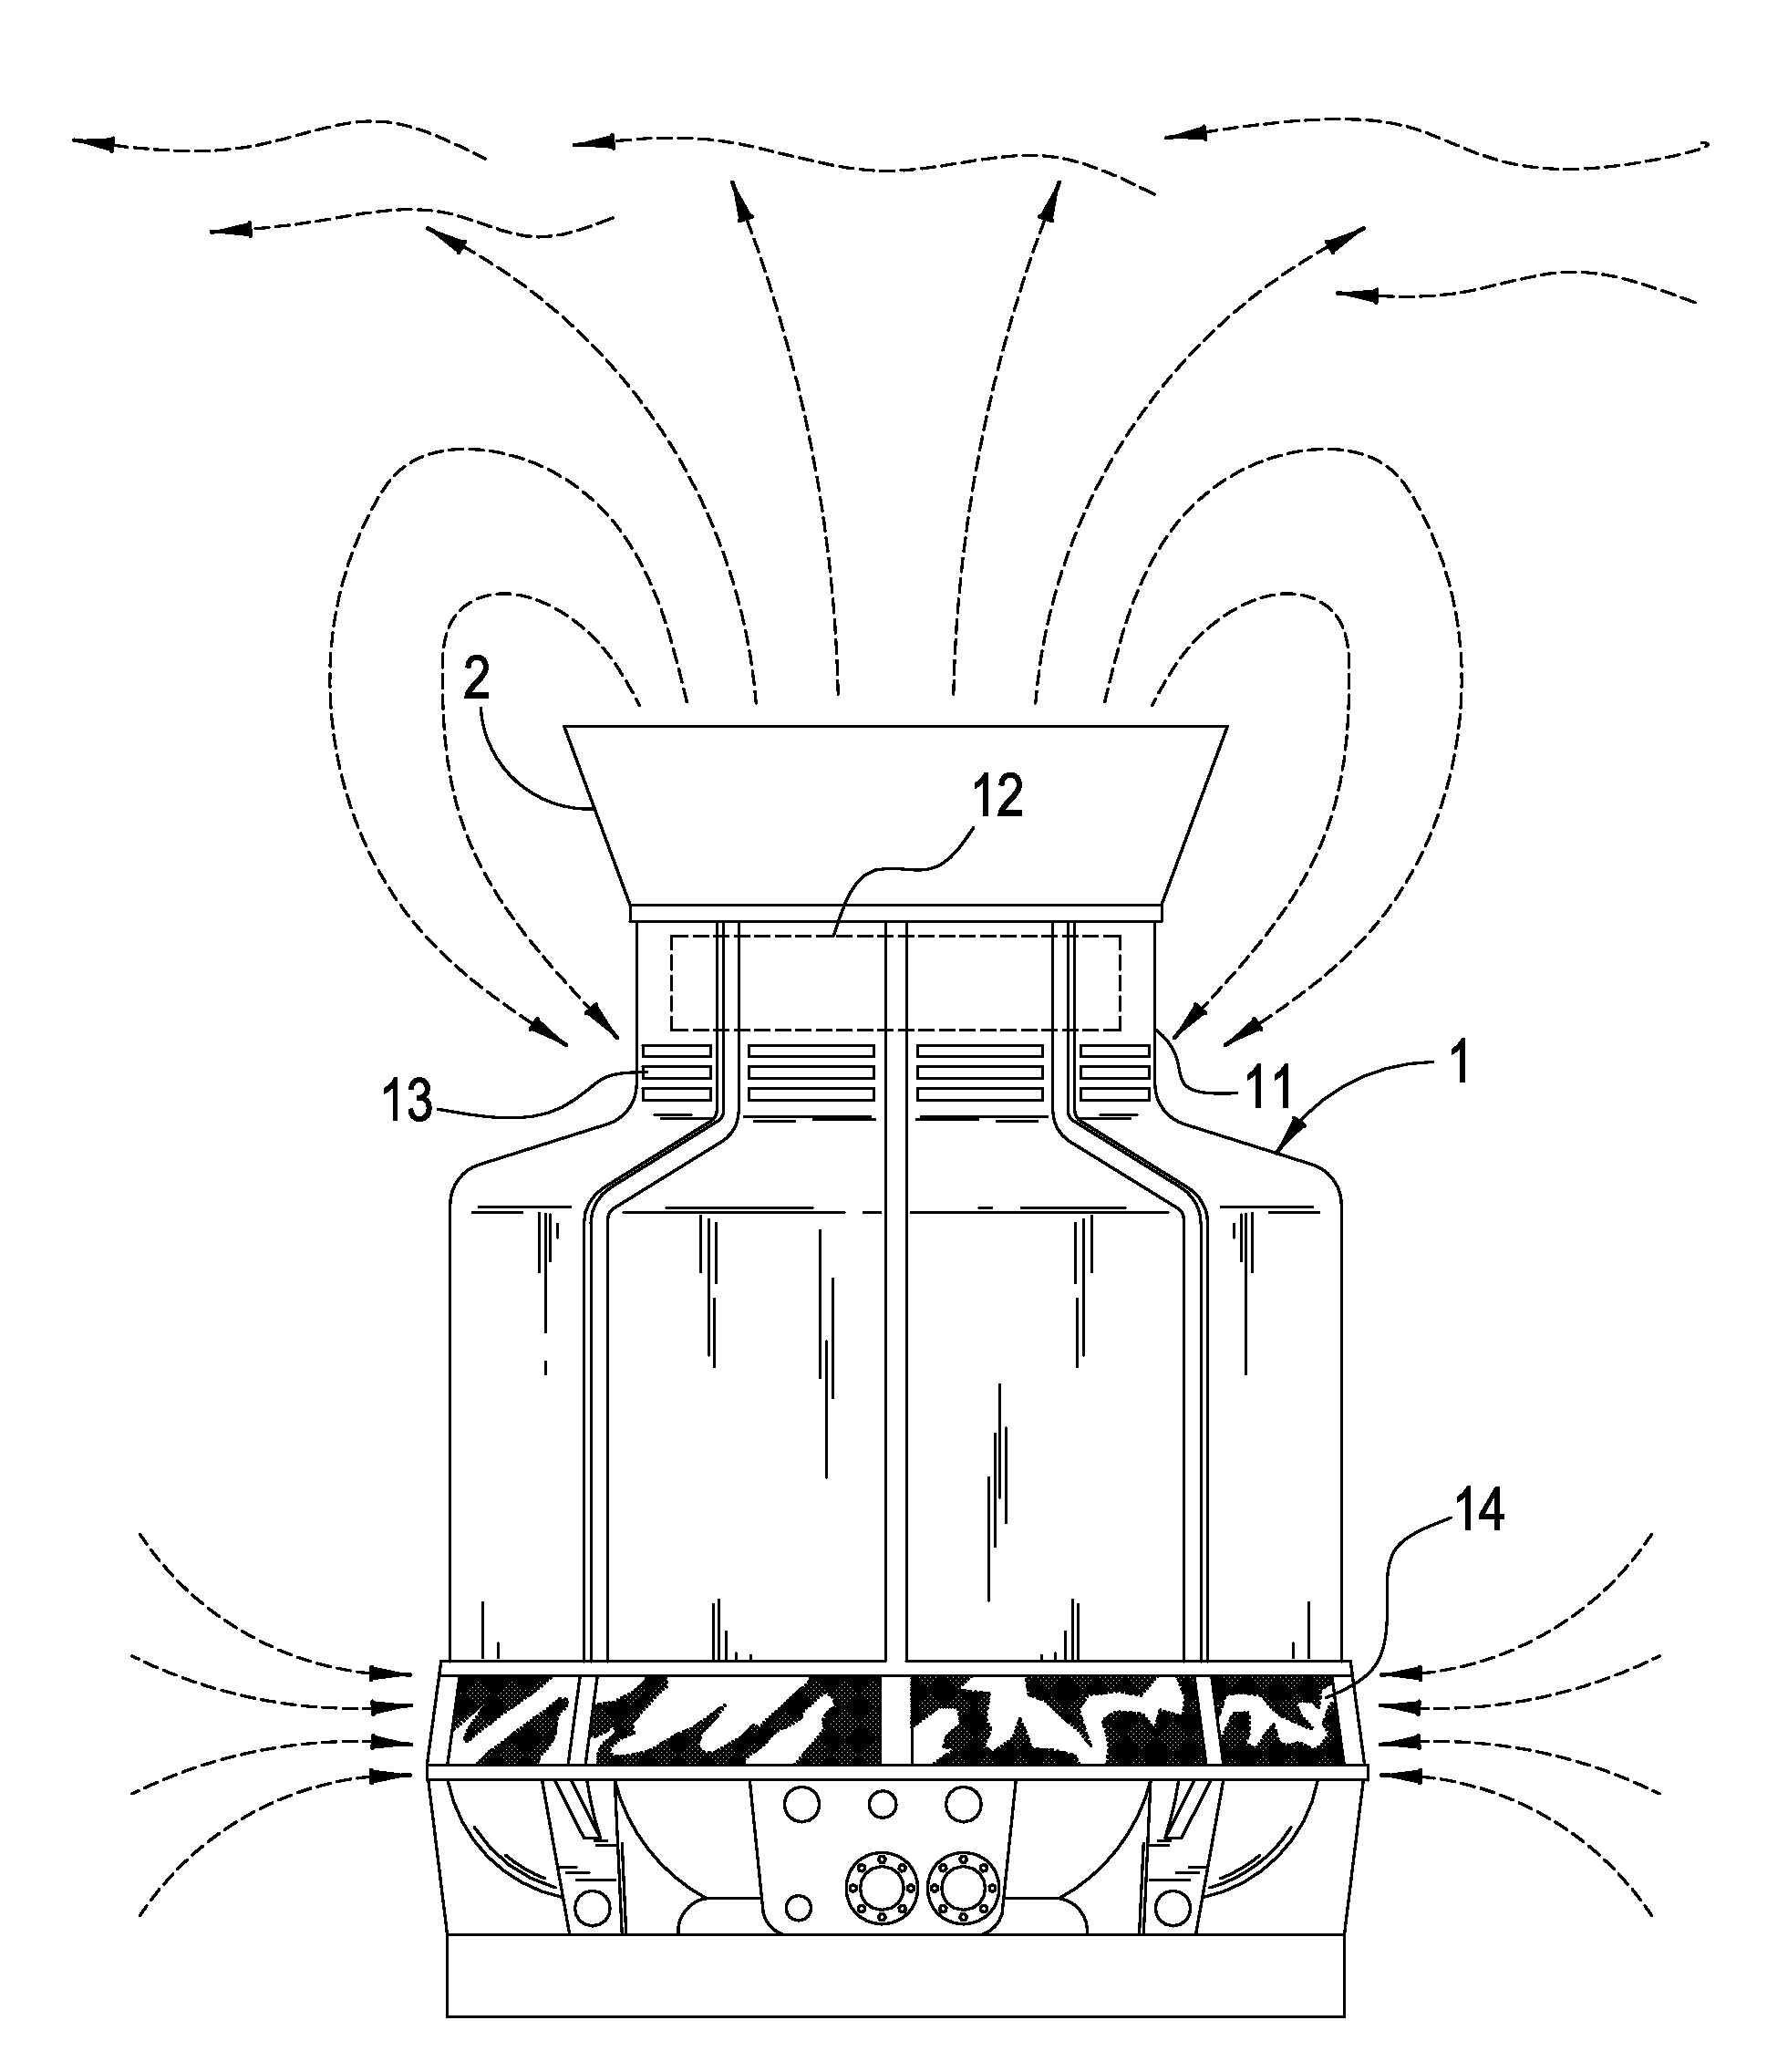 Structure of cooling tower